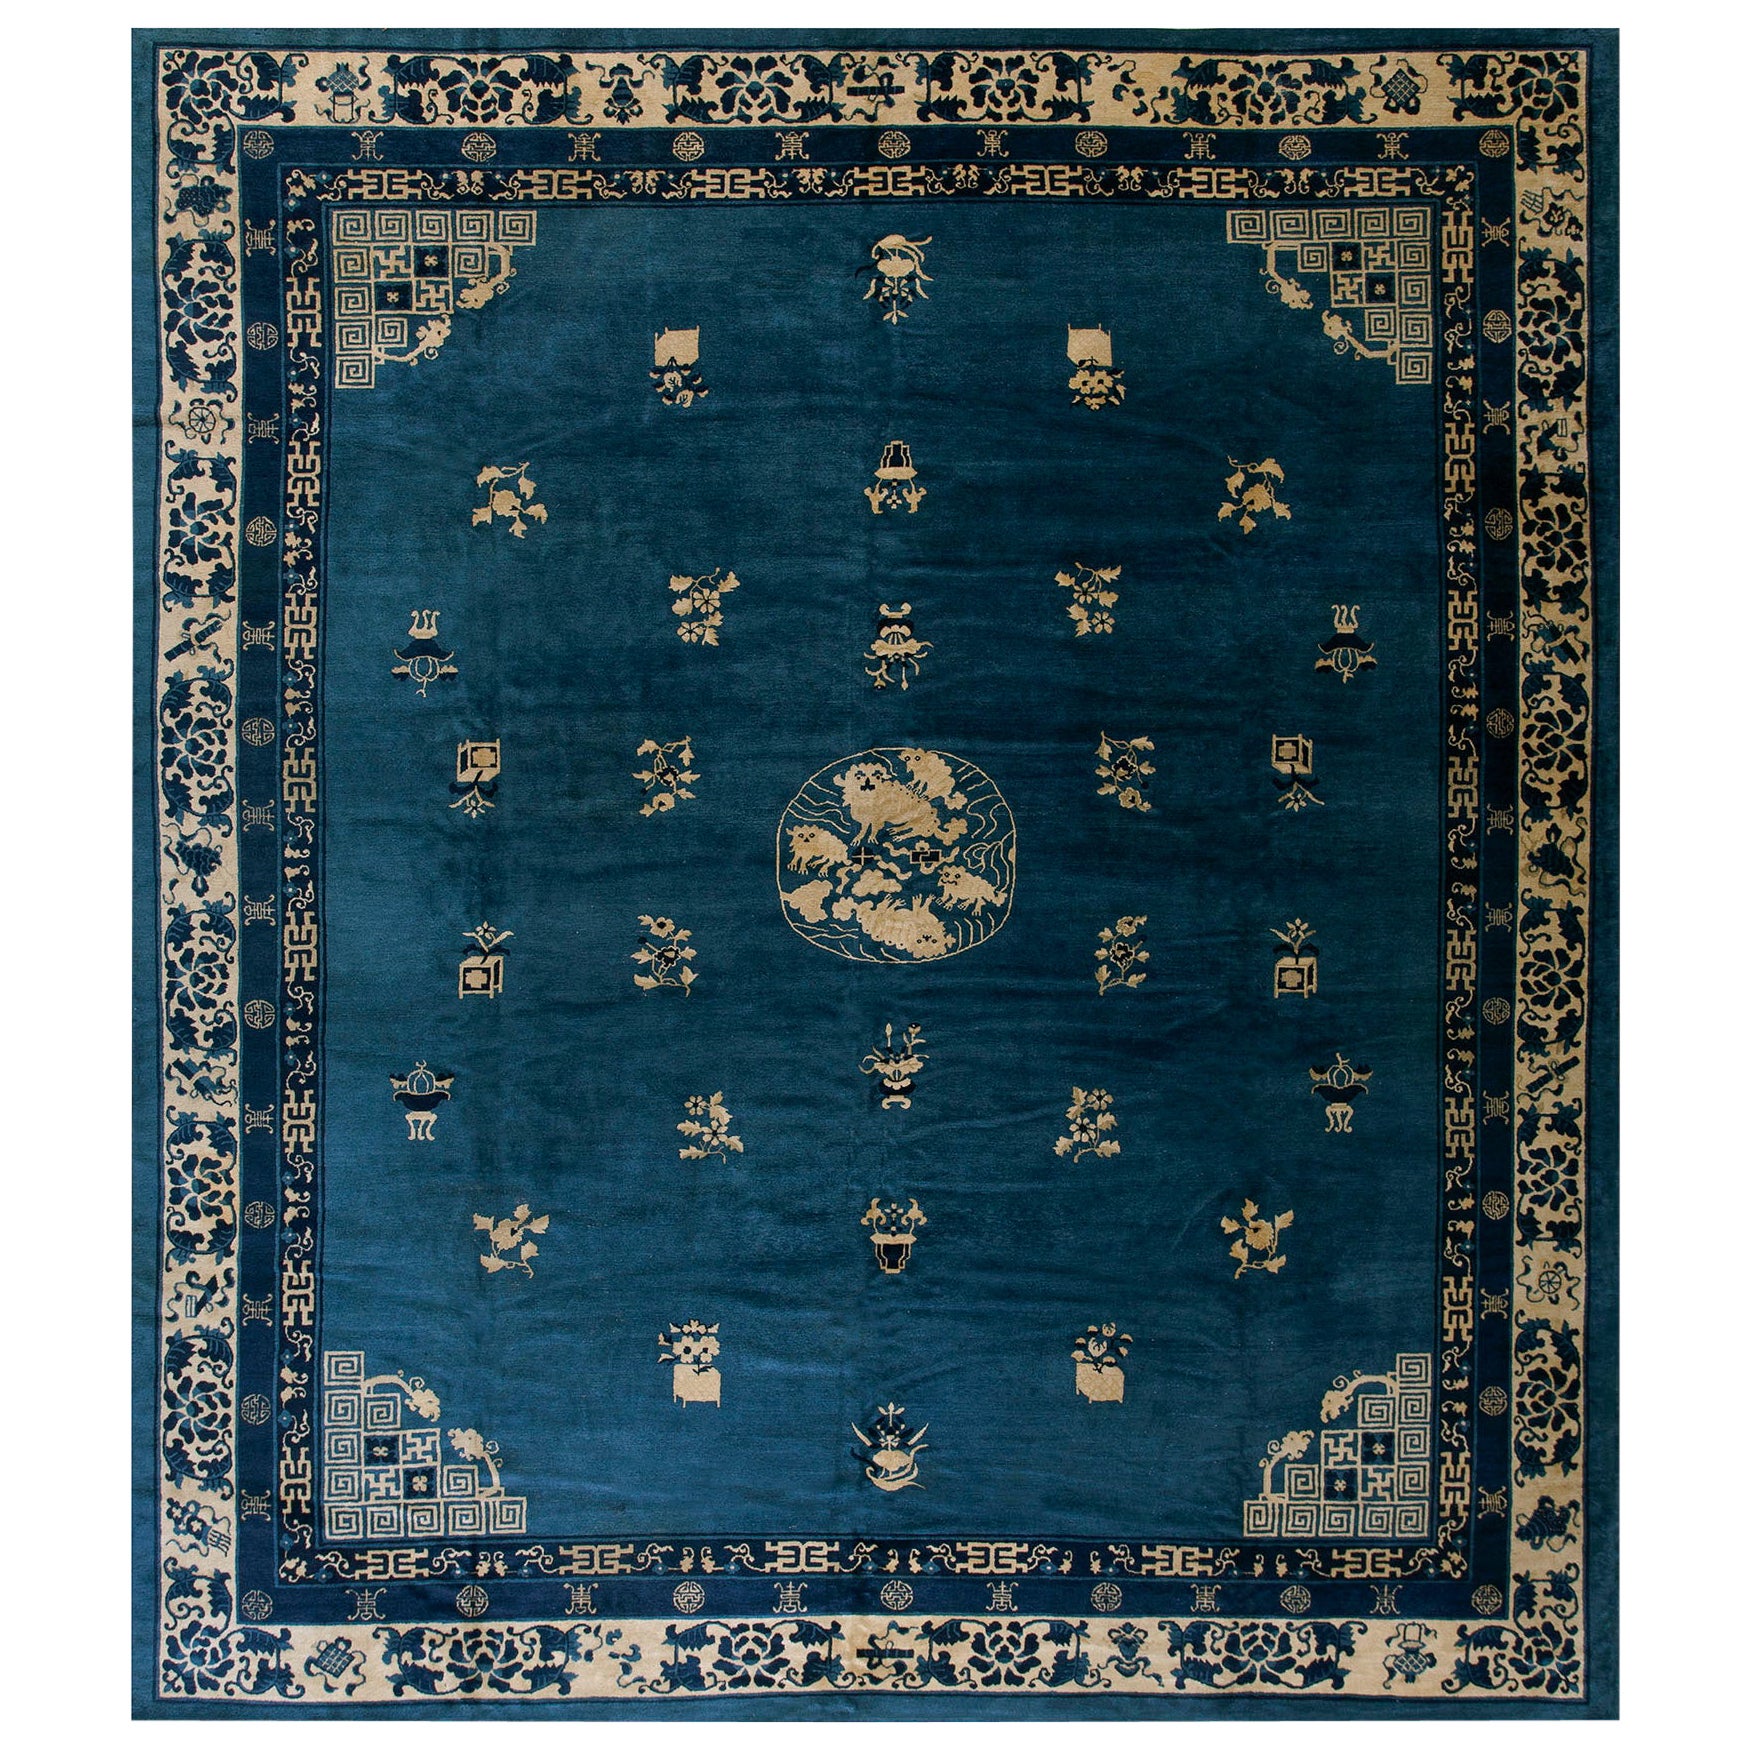 Early 20th Century Chinese Peking Carpet ( 10'6" x 12'6" - 320 x 380 cm ) For Sale